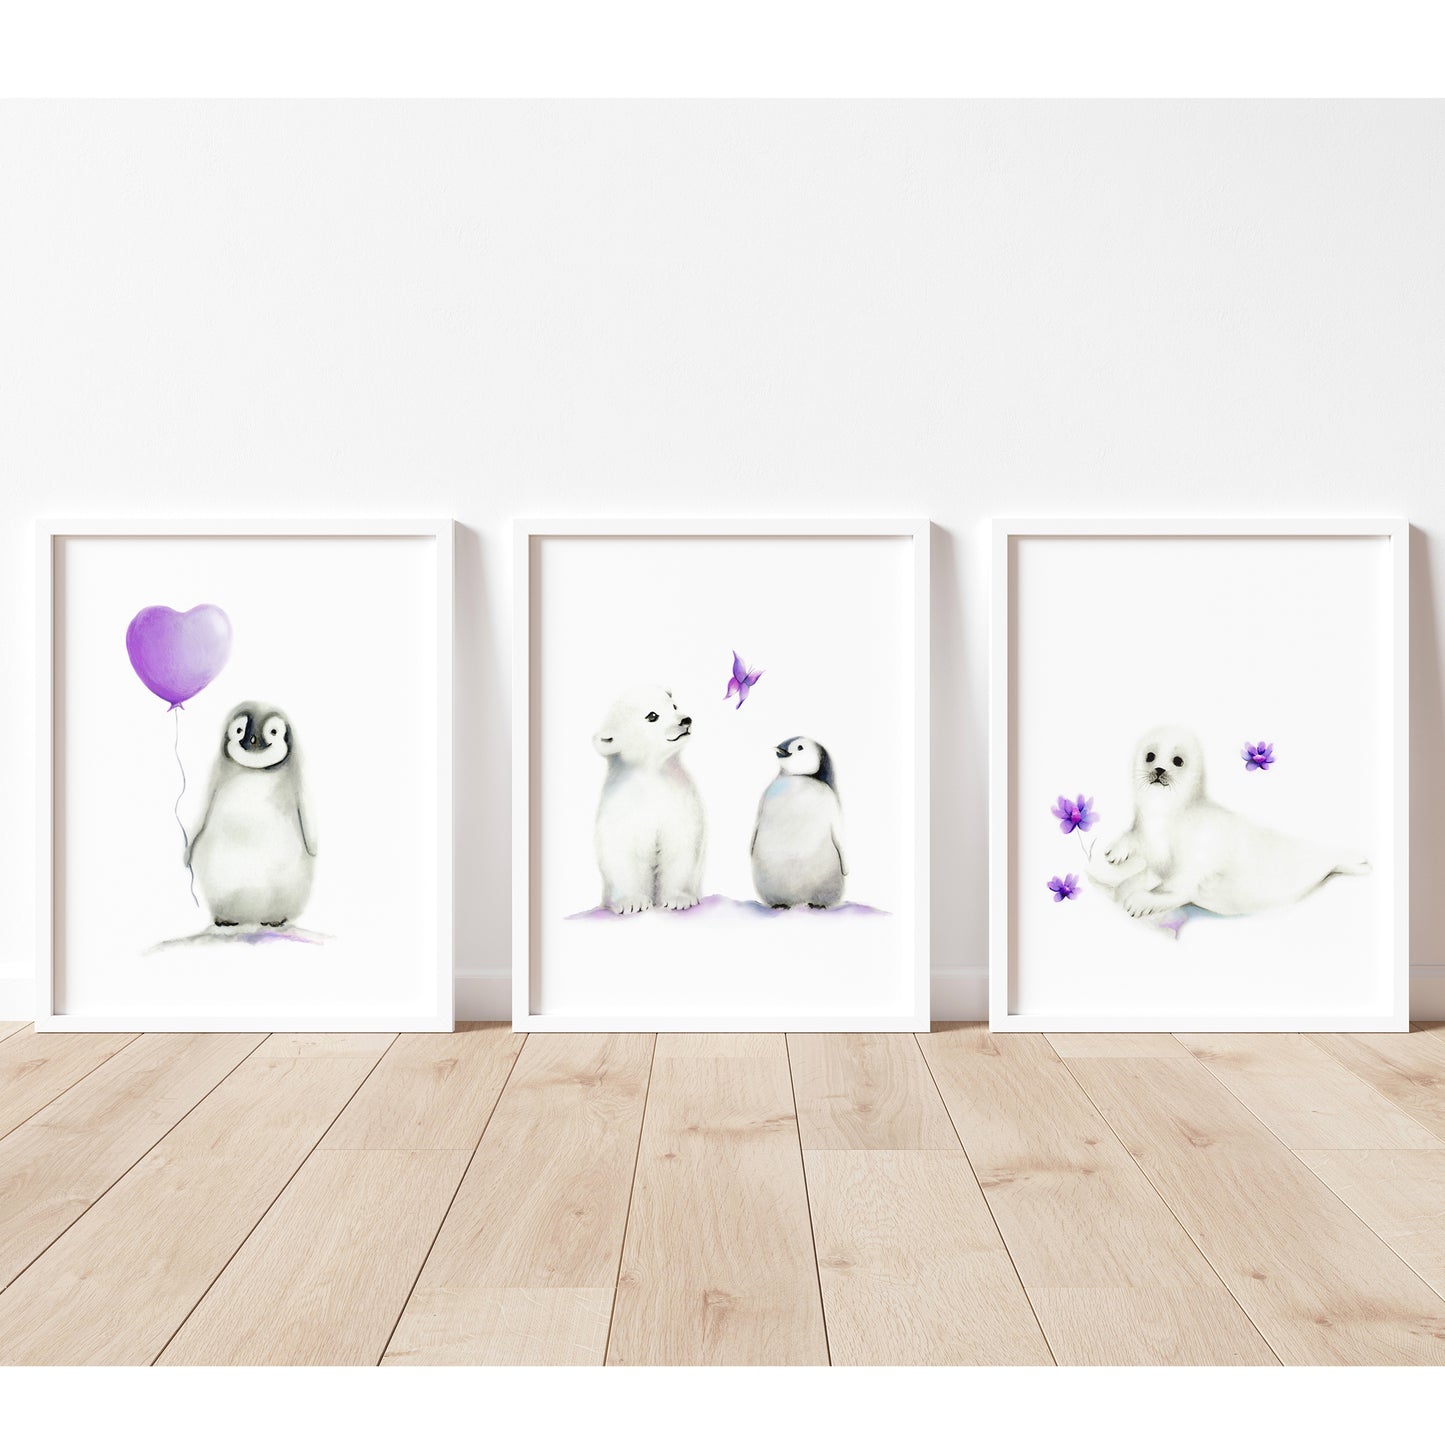 Set of 3 baby arctic animal prints with balloon, butterfly and flowers - Studio Q - Art by Nicky Quartermaine Scott